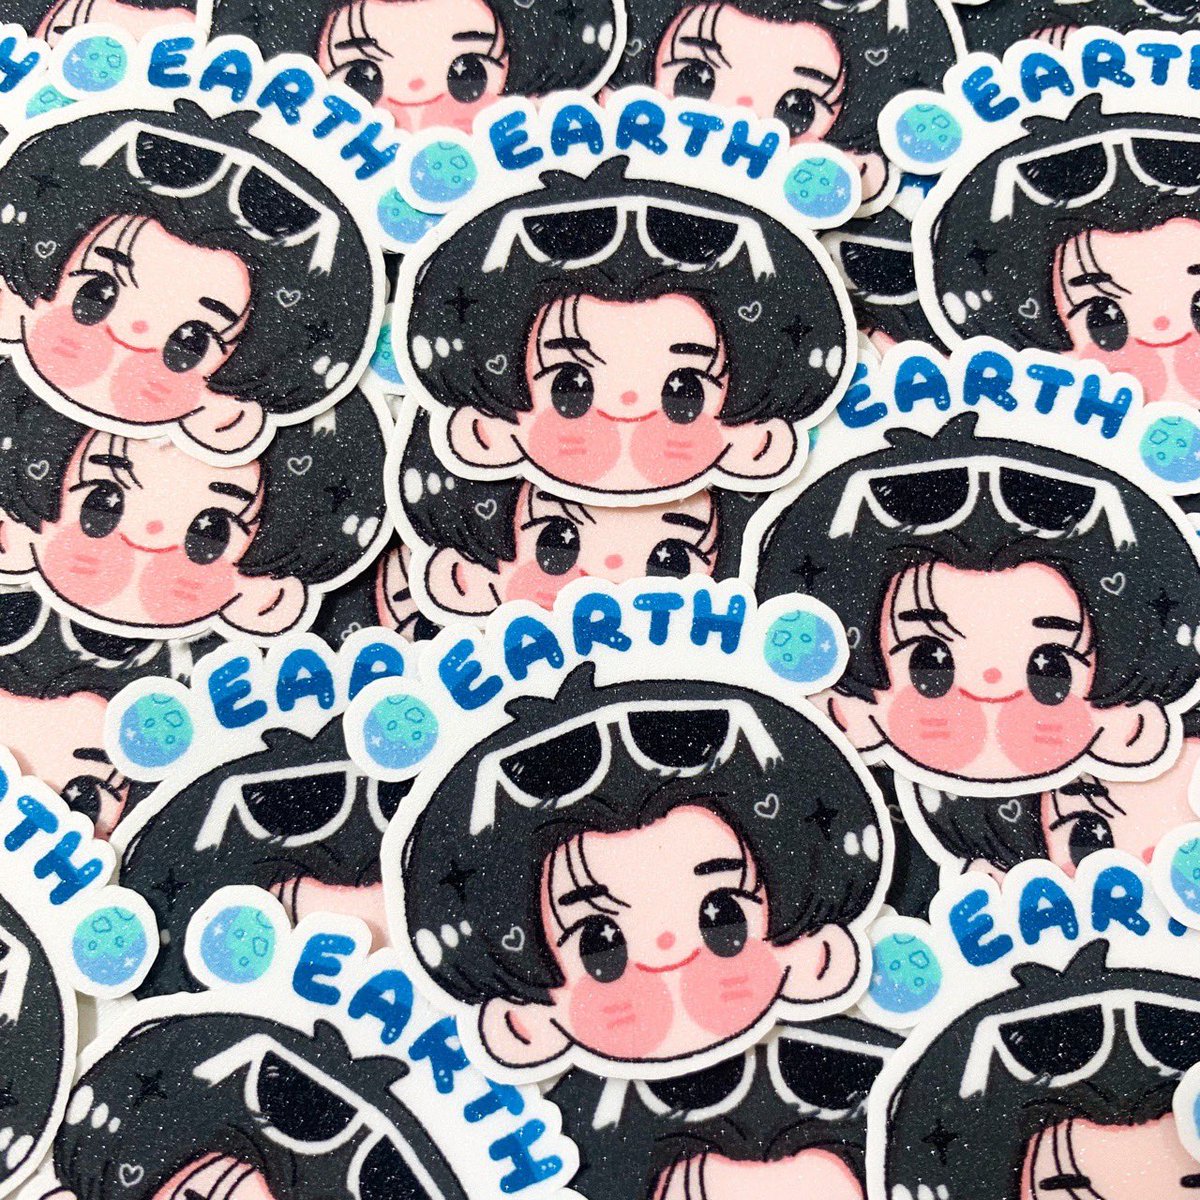 Preview & Special Thanks 🫶🏻

Cms by  #โมจจิcommission
Sticker  @patraweprinting
Mini bag @bagbardesign